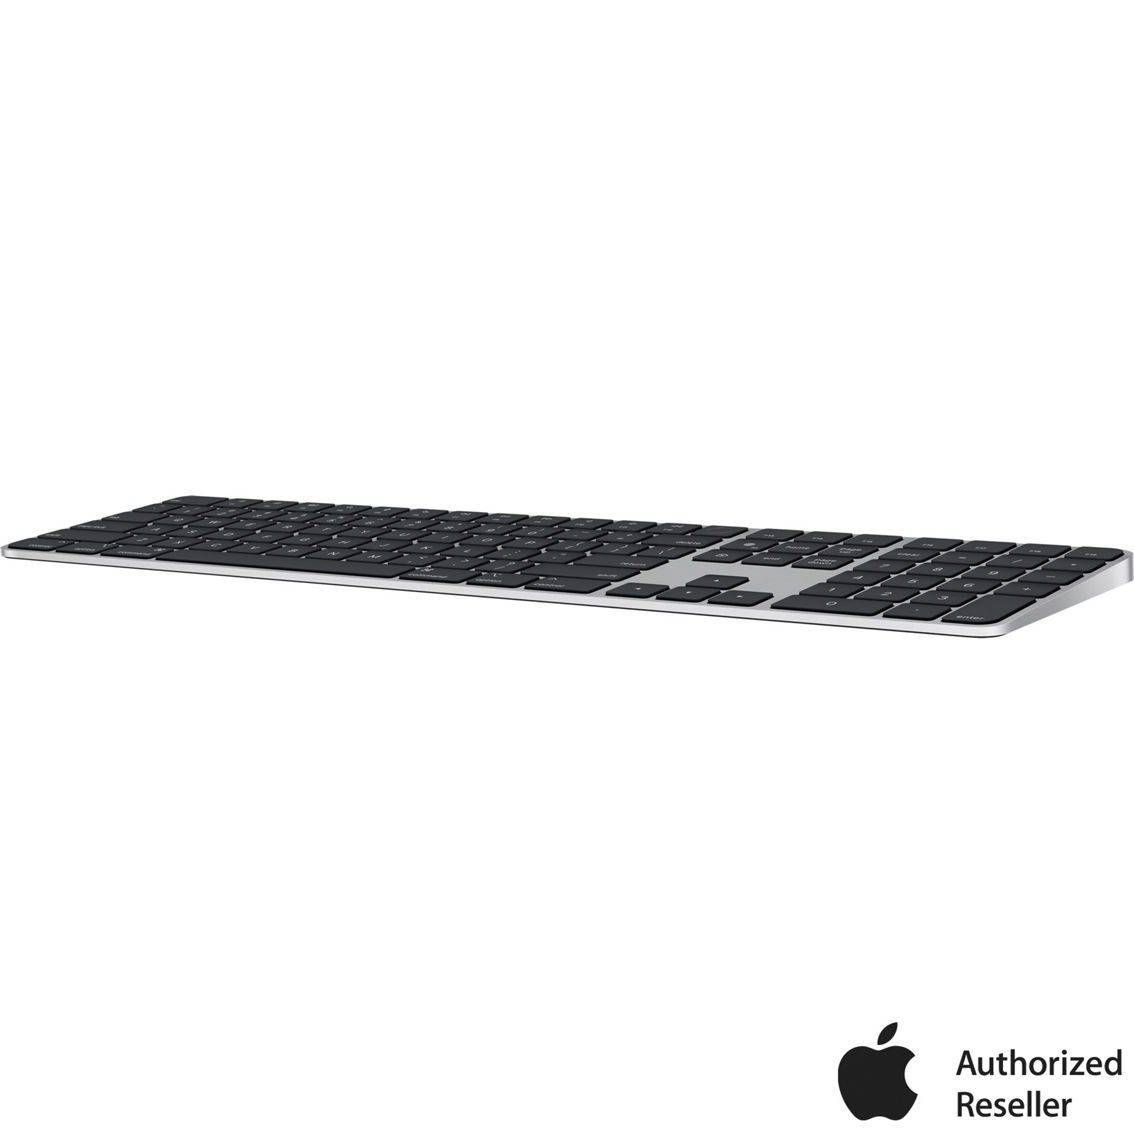 Apple Magic Keyboard with Touch ID and Numeric Keypad for Mac Models - Image 2 of 3